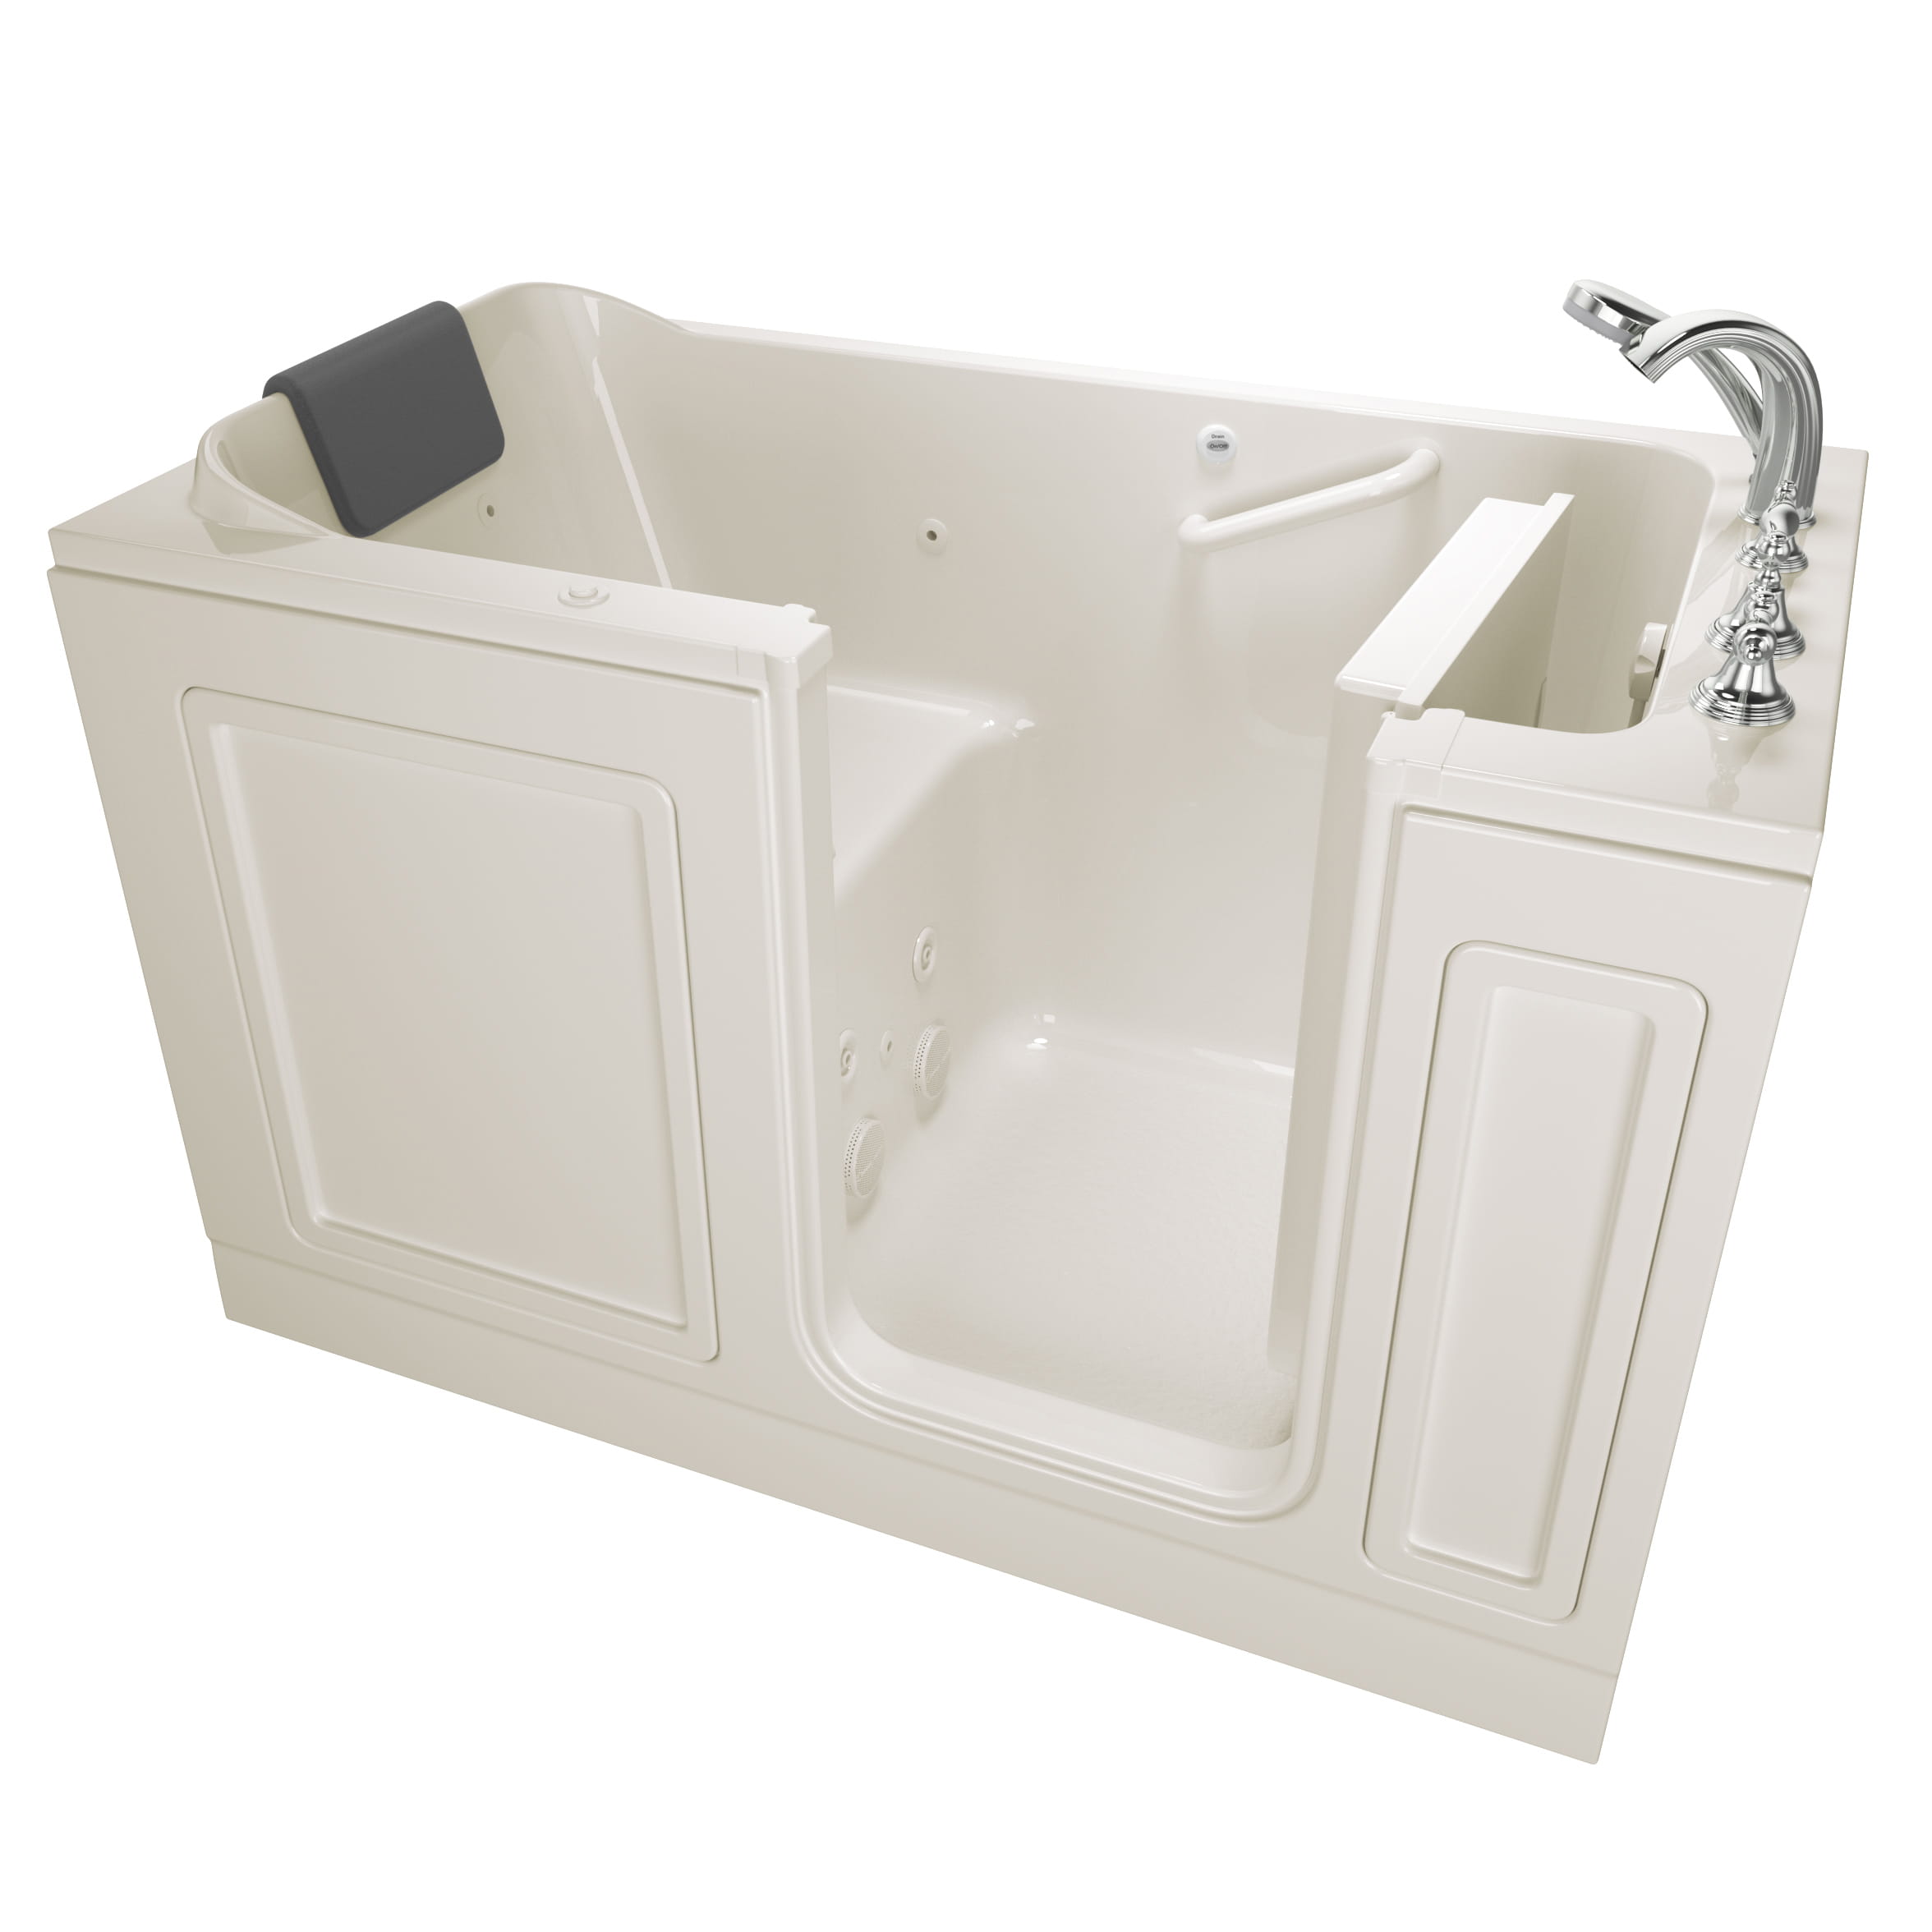 Acrylic Luxury Series 32 x 60 -Inch Walk-in Tub With Whirlpool System - Right-Hand Drain With Faucet